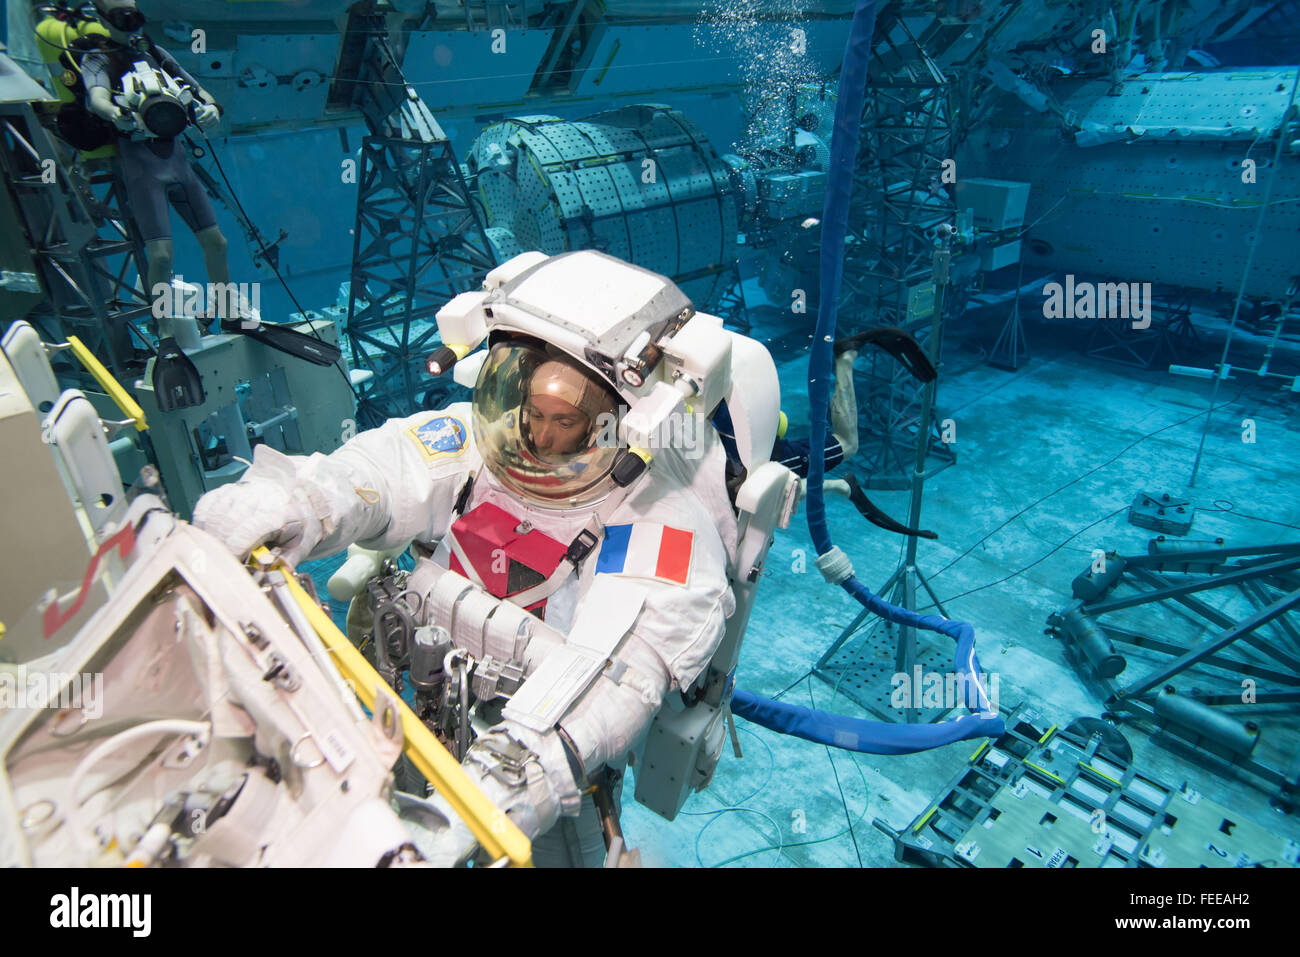 French ESA astronaut Thomas Pesquet during training with the EVA spacesuit in the Neutral Buoyancy Lab simulator at the Johnson Space Center January 12, 2016 in Houston, Texas. Stock Photo